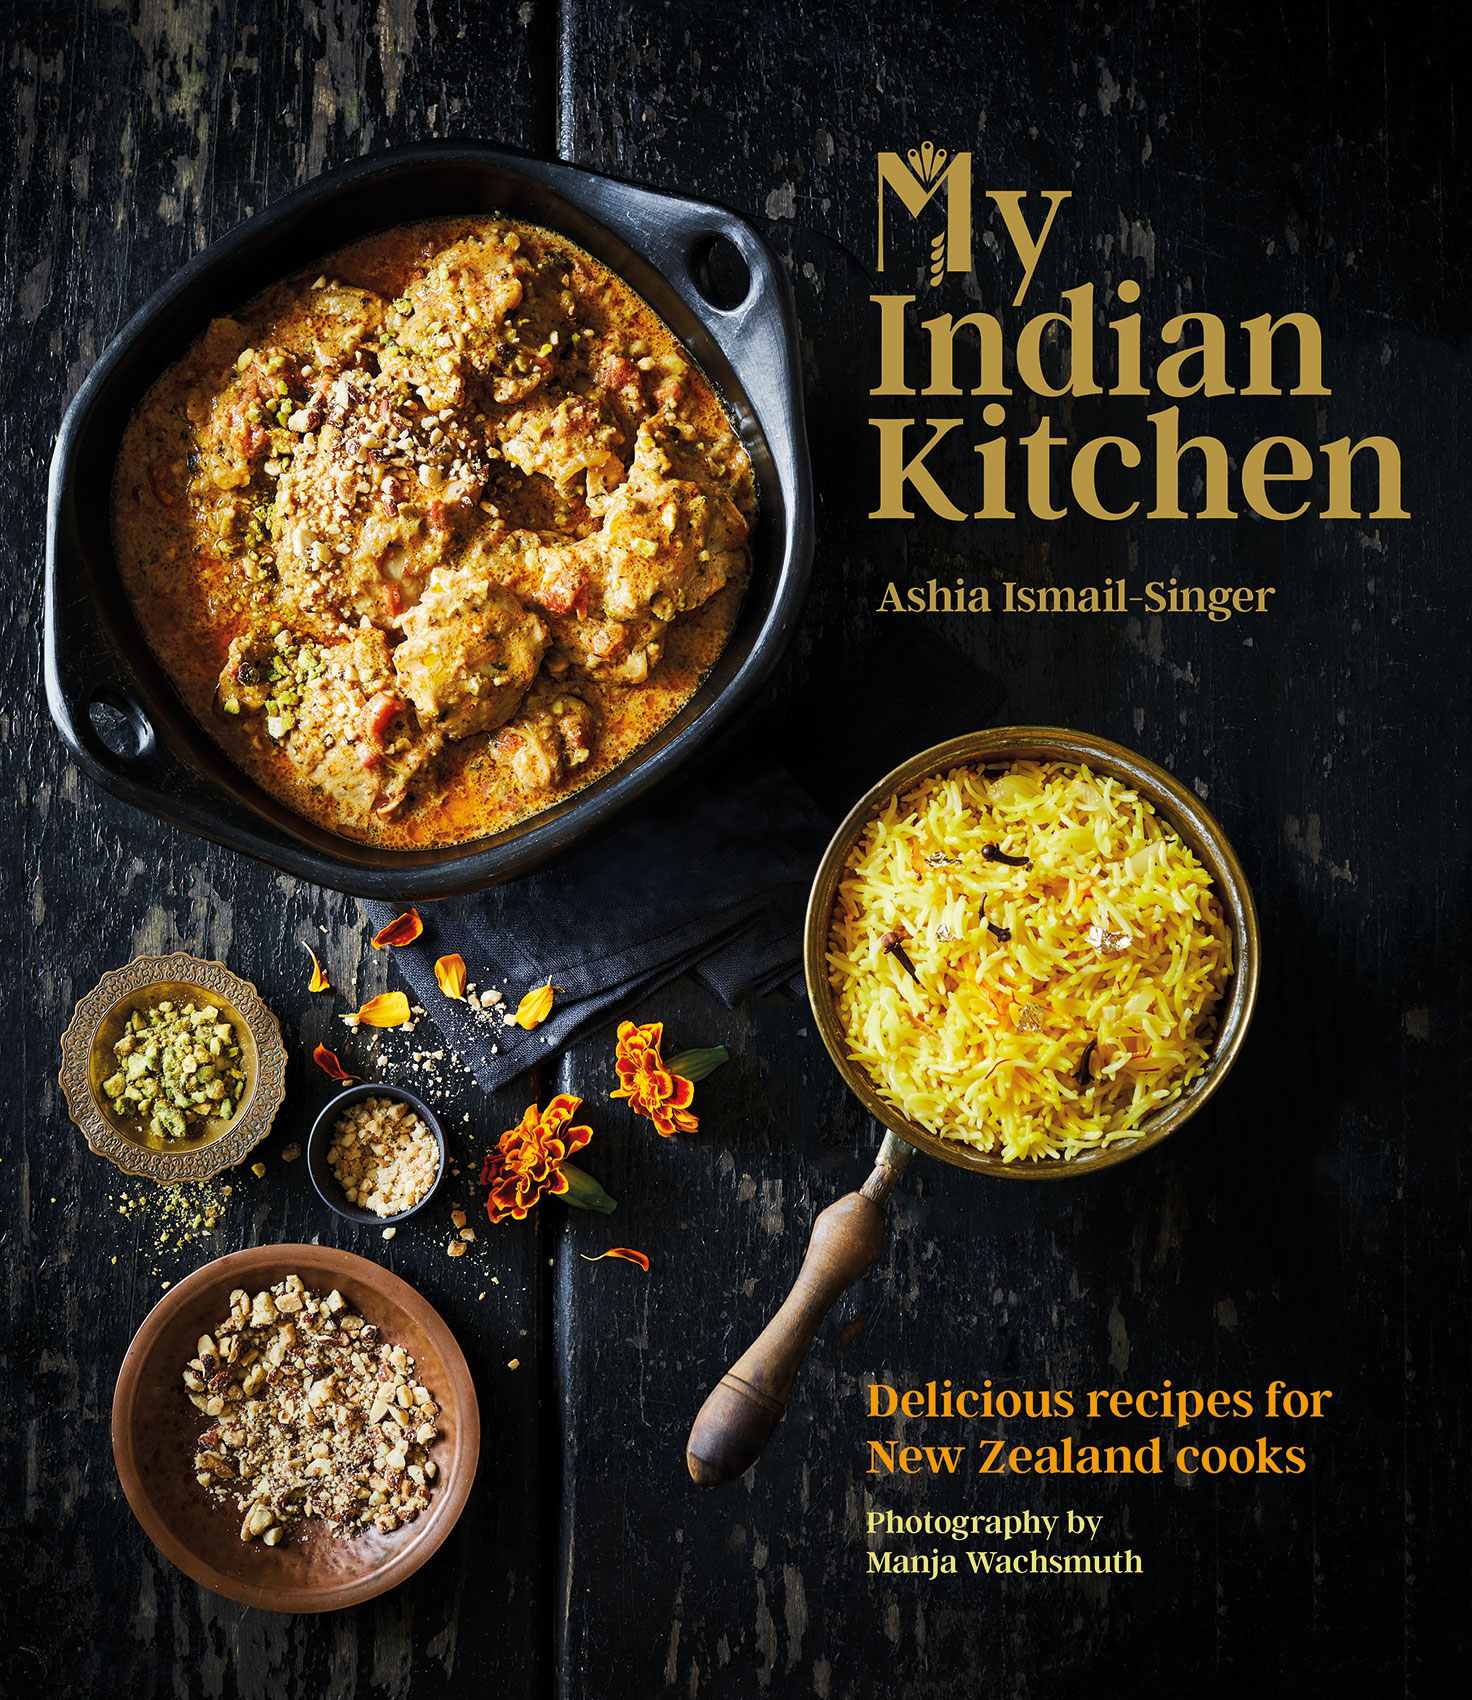 My Indian Kitchen • Delicious Recipes for New Zealand Cooks Cover by Ashia Ismail-Singer • Cookbook & Editorial Food Photography